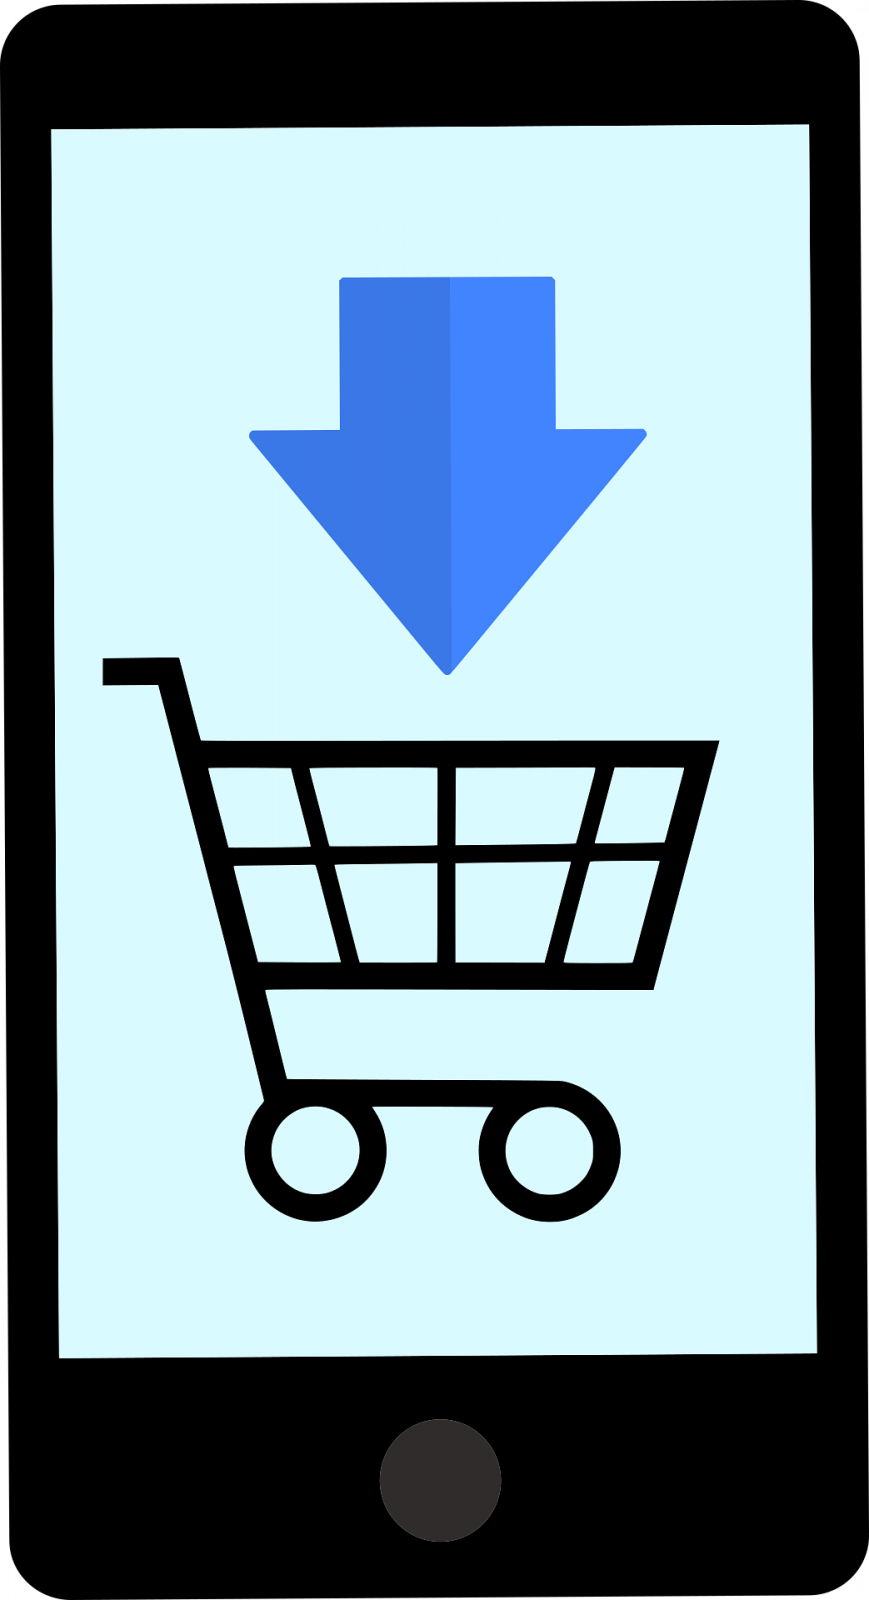 A graphic of a smartphone with a shopping cart icon suggesting online shopping